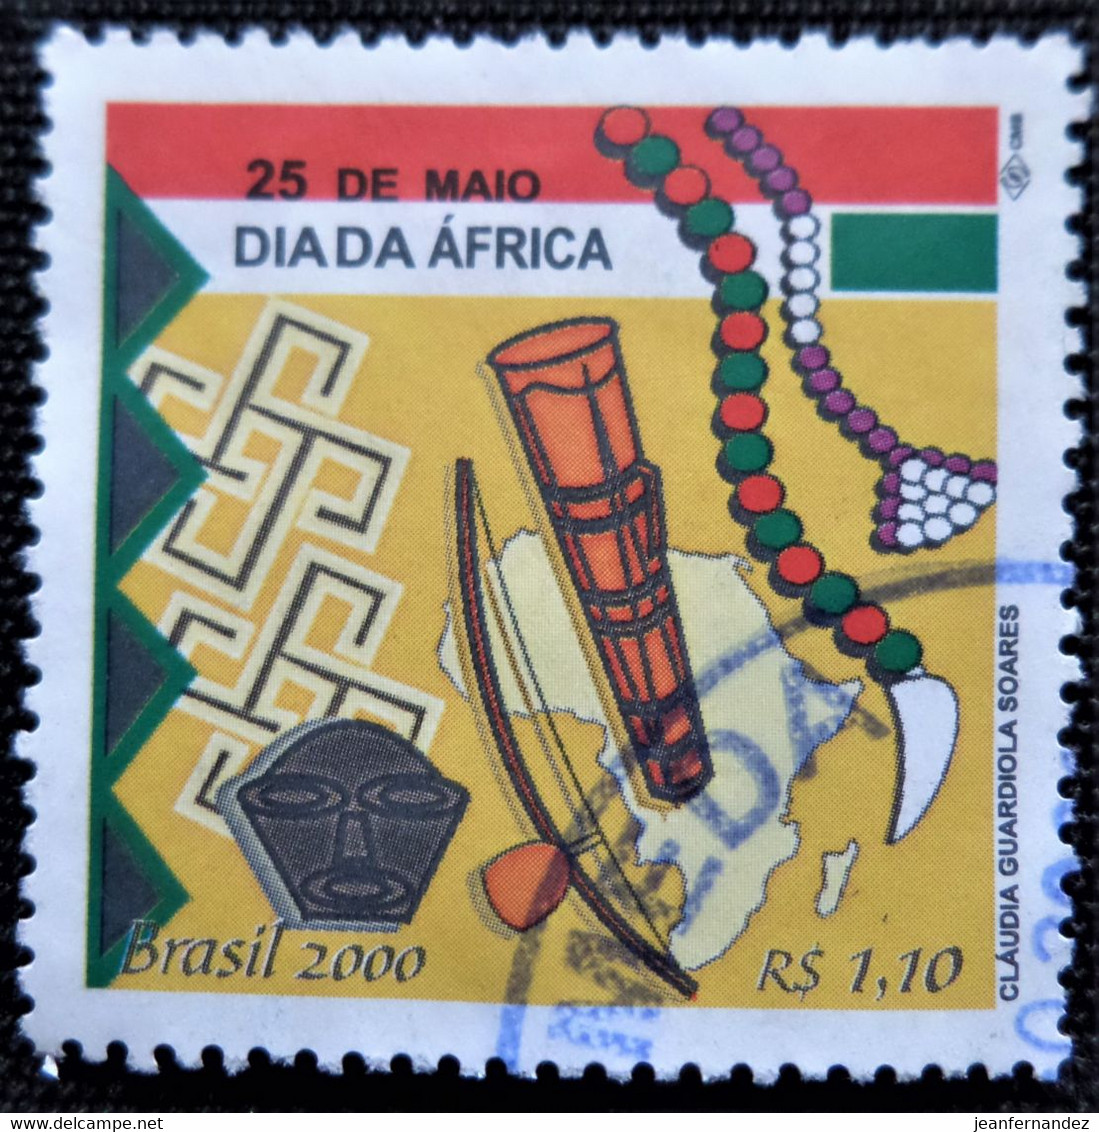 Timbre Du Brésil 2000 Africa Day   Stampworld N° 3057 - Used Stamps